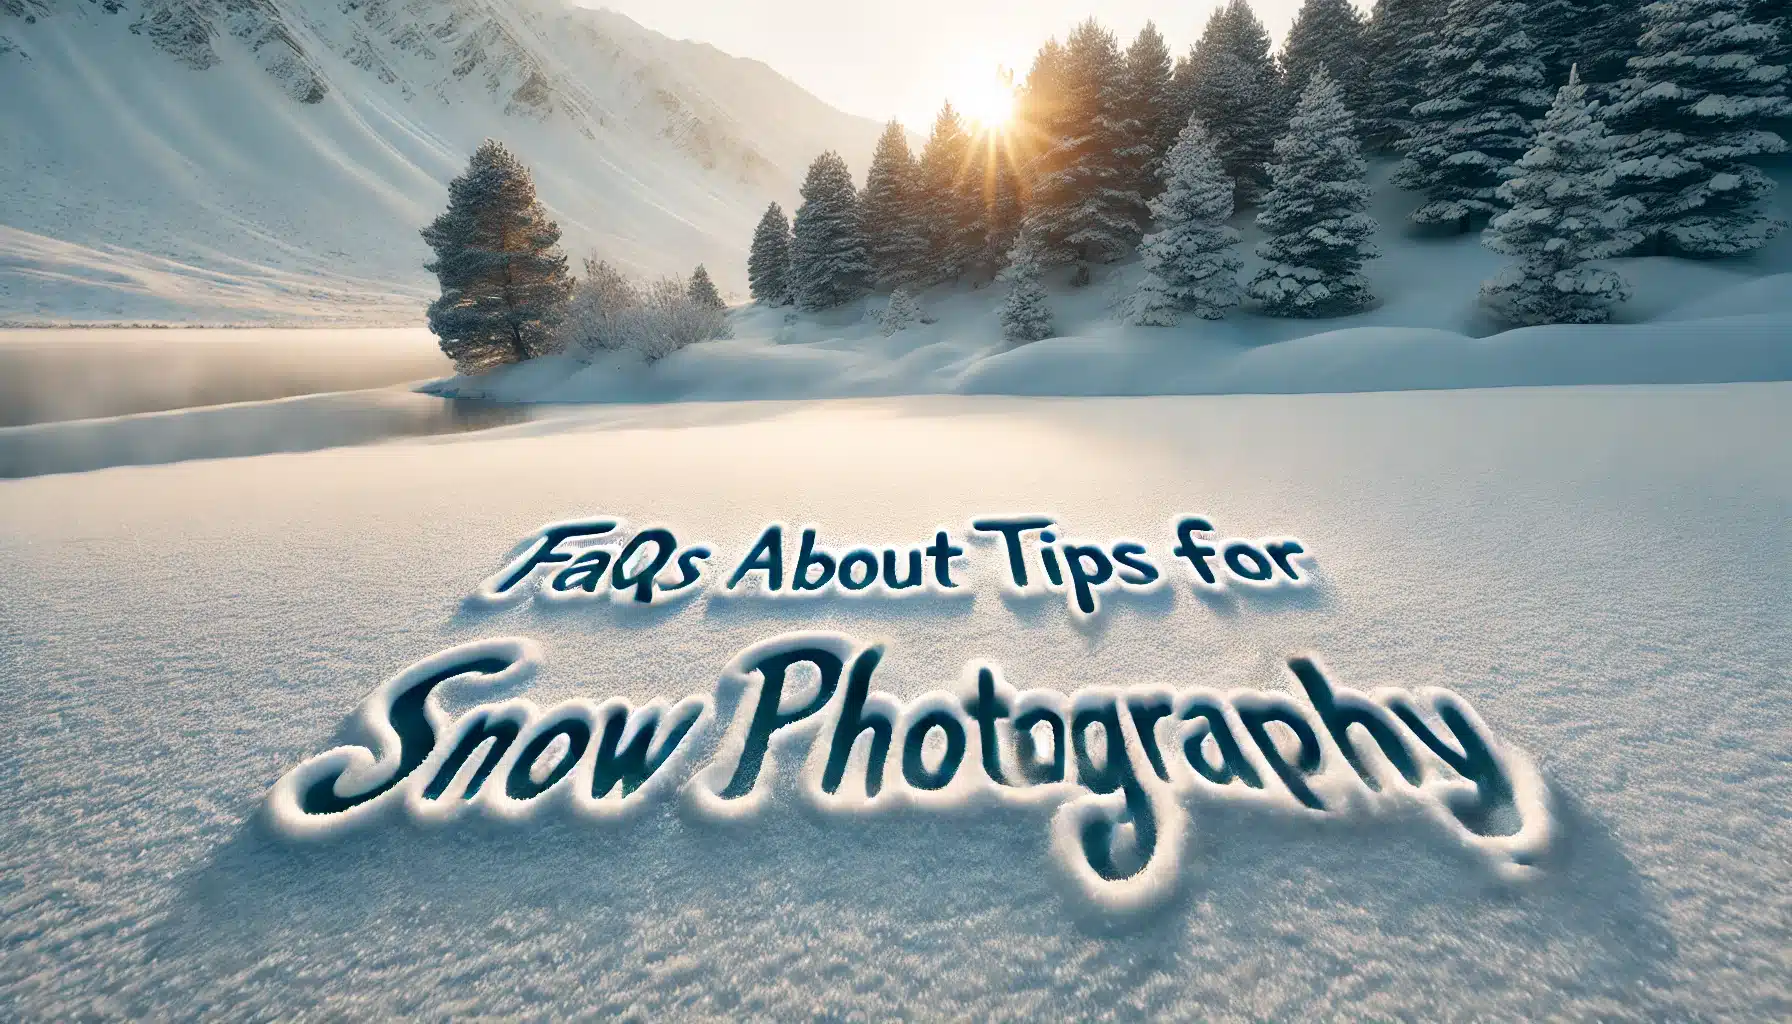 The words "FAQs About Tips for Snow Photography" written in the snow, with a snowy landscape featuring snow-covered trees and a serene winter scene in the background.